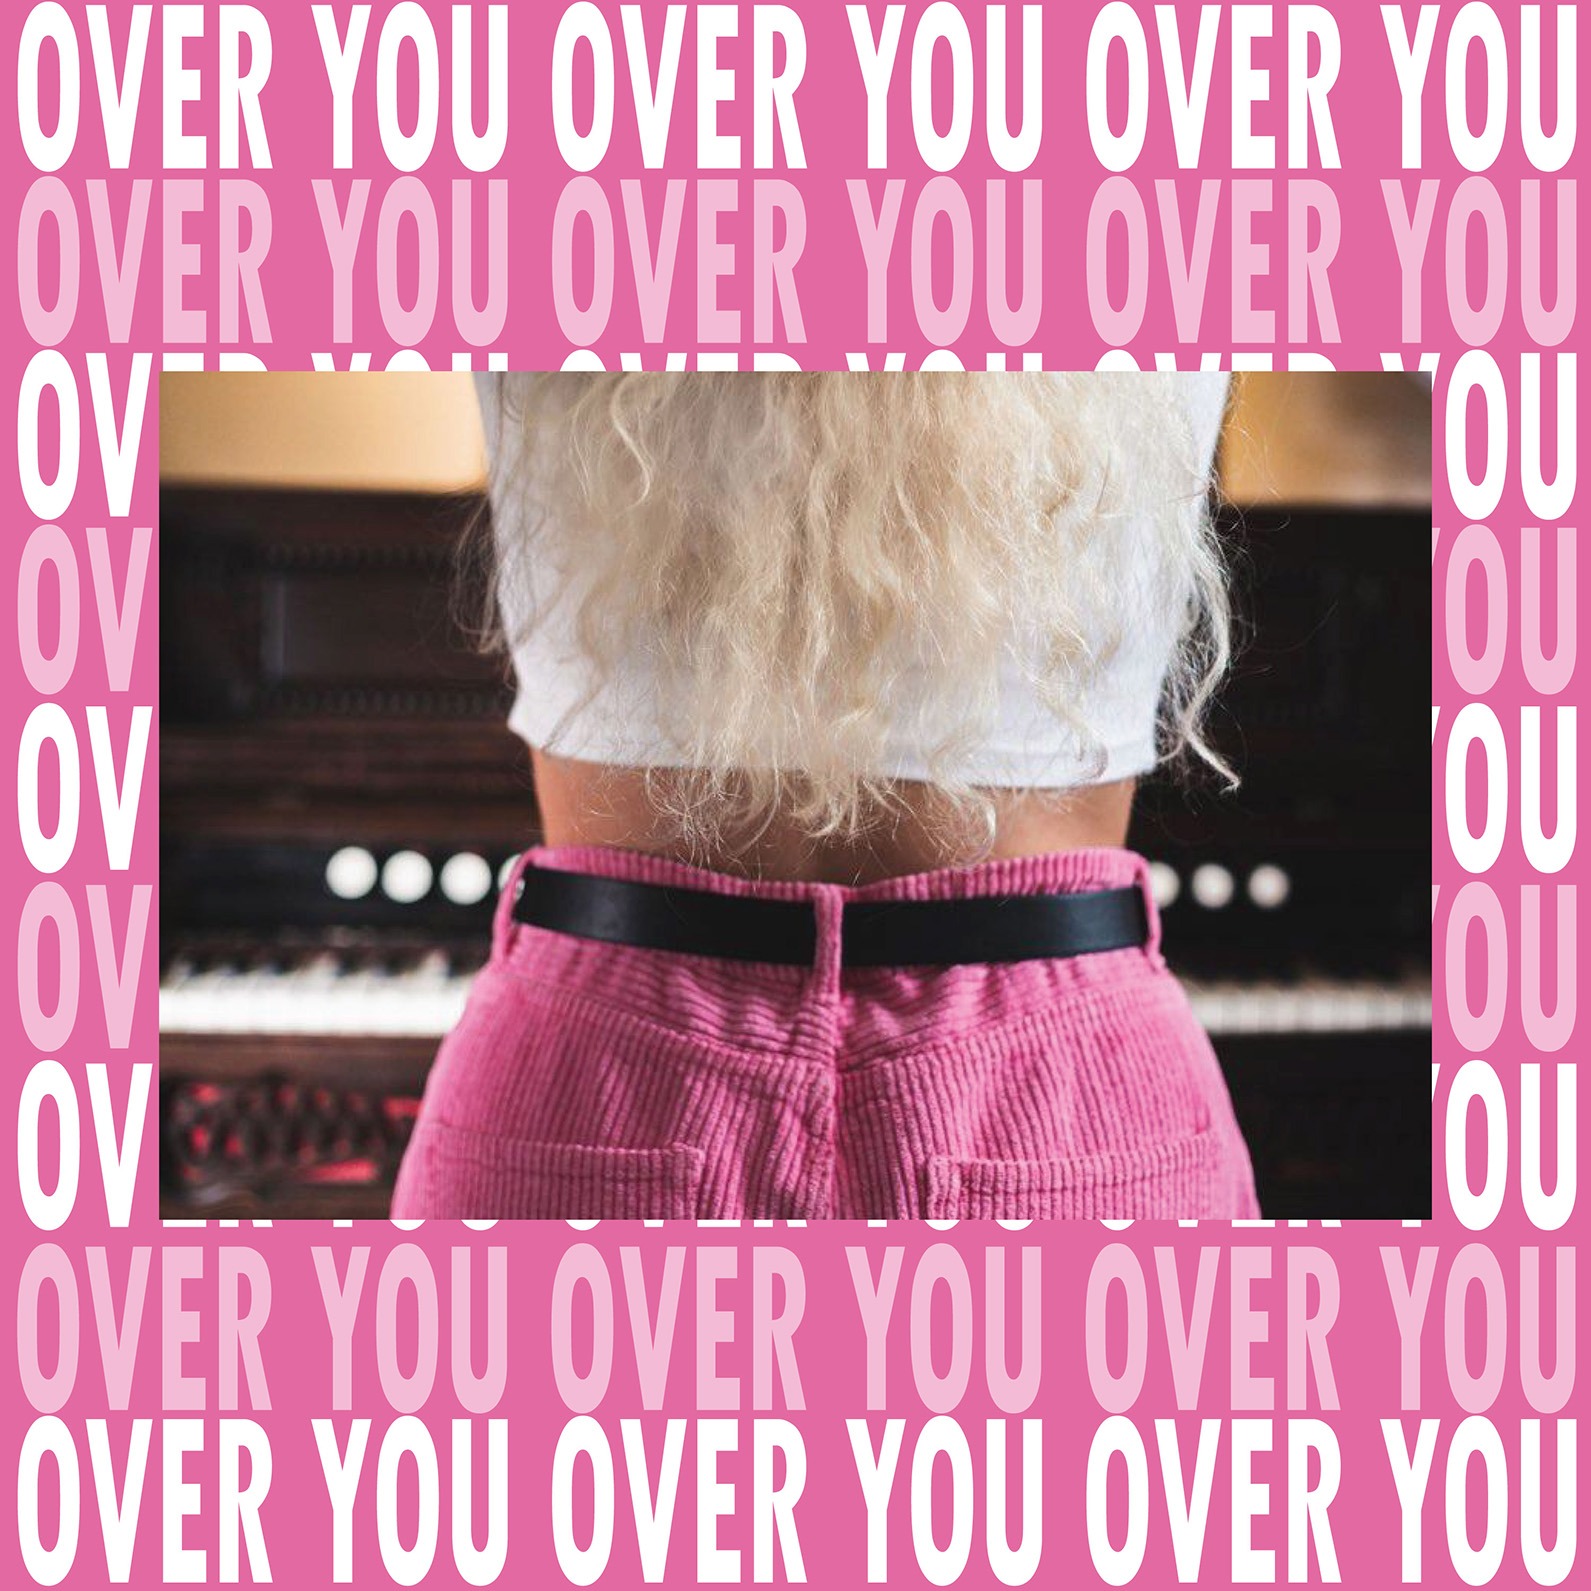 EMMA HORAN releases new single ‘Over You’ - Listen Now 